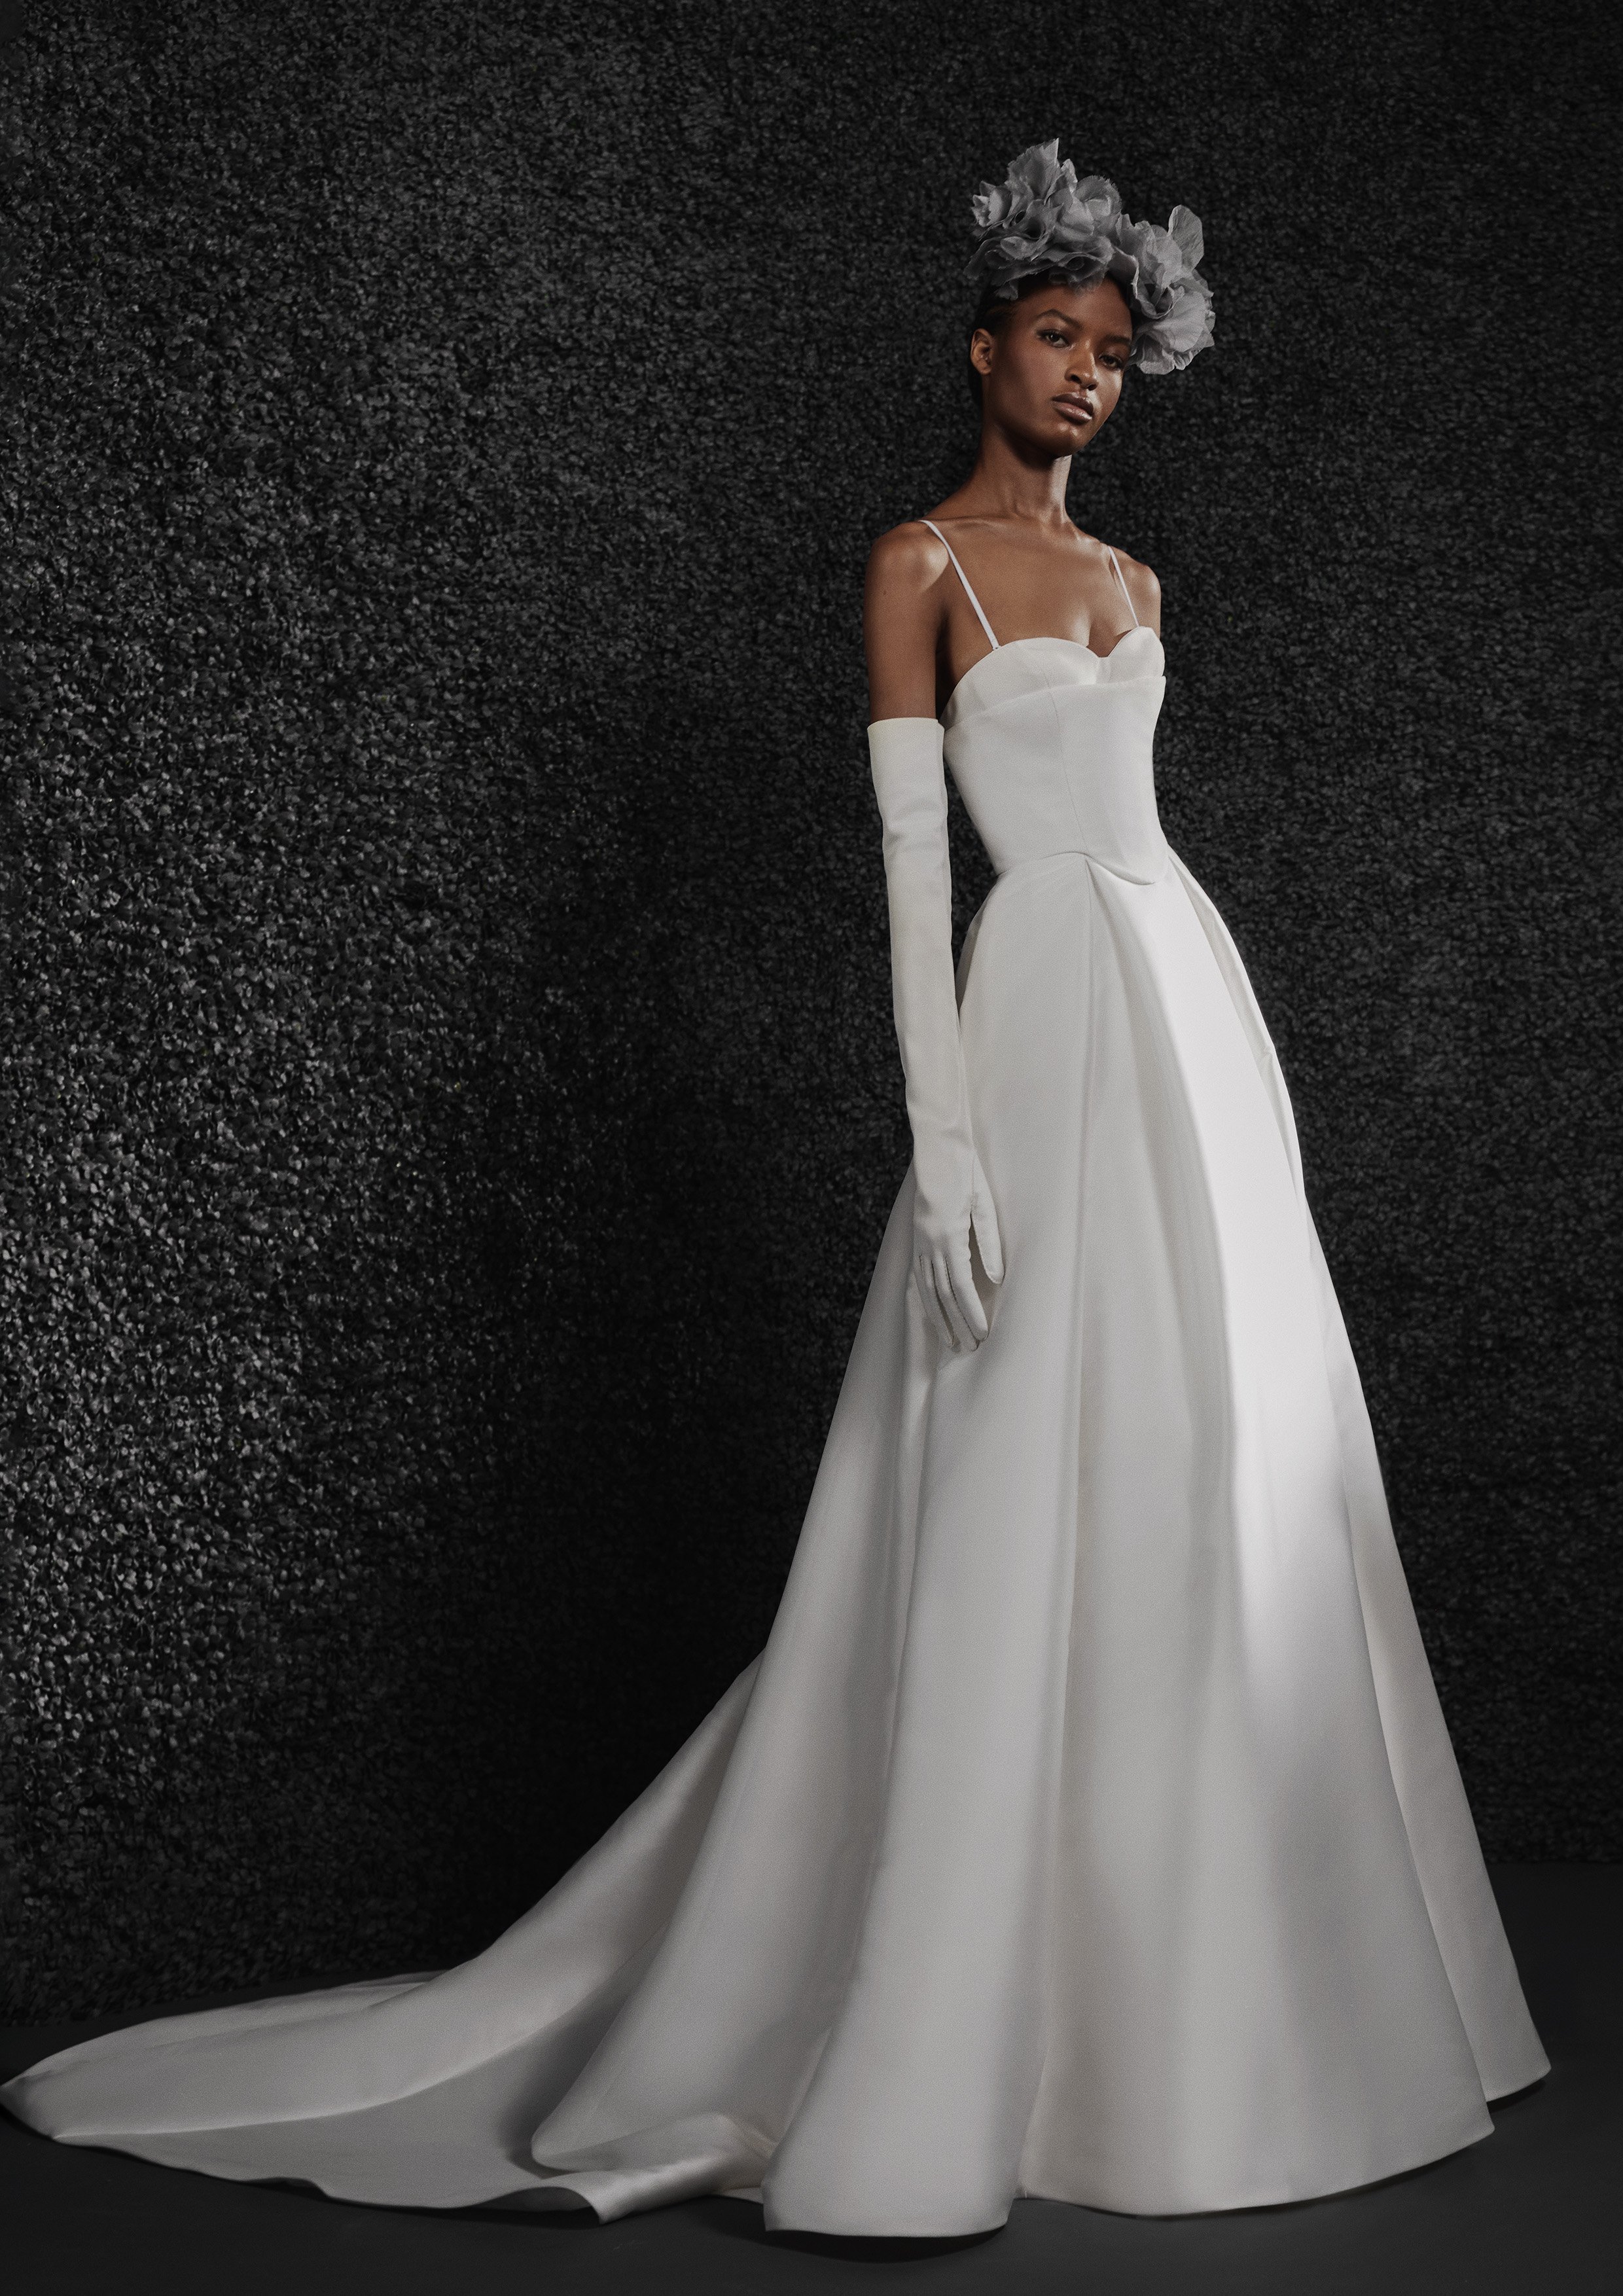 Vera Wang Bride — The White Gown